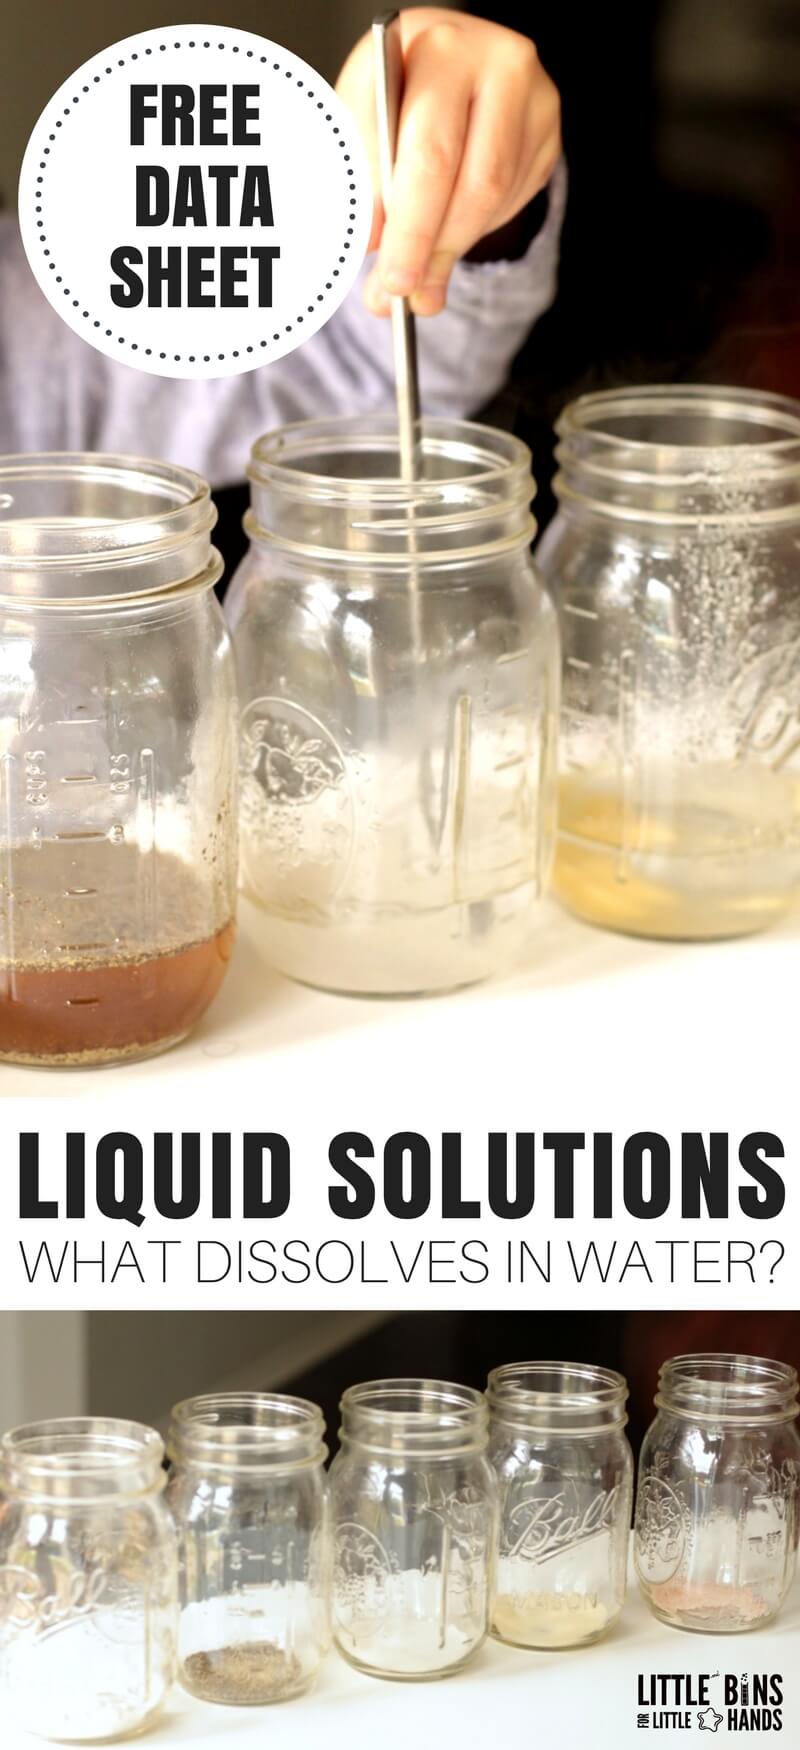 Do you know which solids dissolve in water and which do not? A super fun kitchen chemistry science experiment for kids that's totally easy to set up. Learn about solutions, solutes, and solvents through experimenting with water and common kitchen ingredients. Grab the free printable too for simple science experiments and STEM all year round!